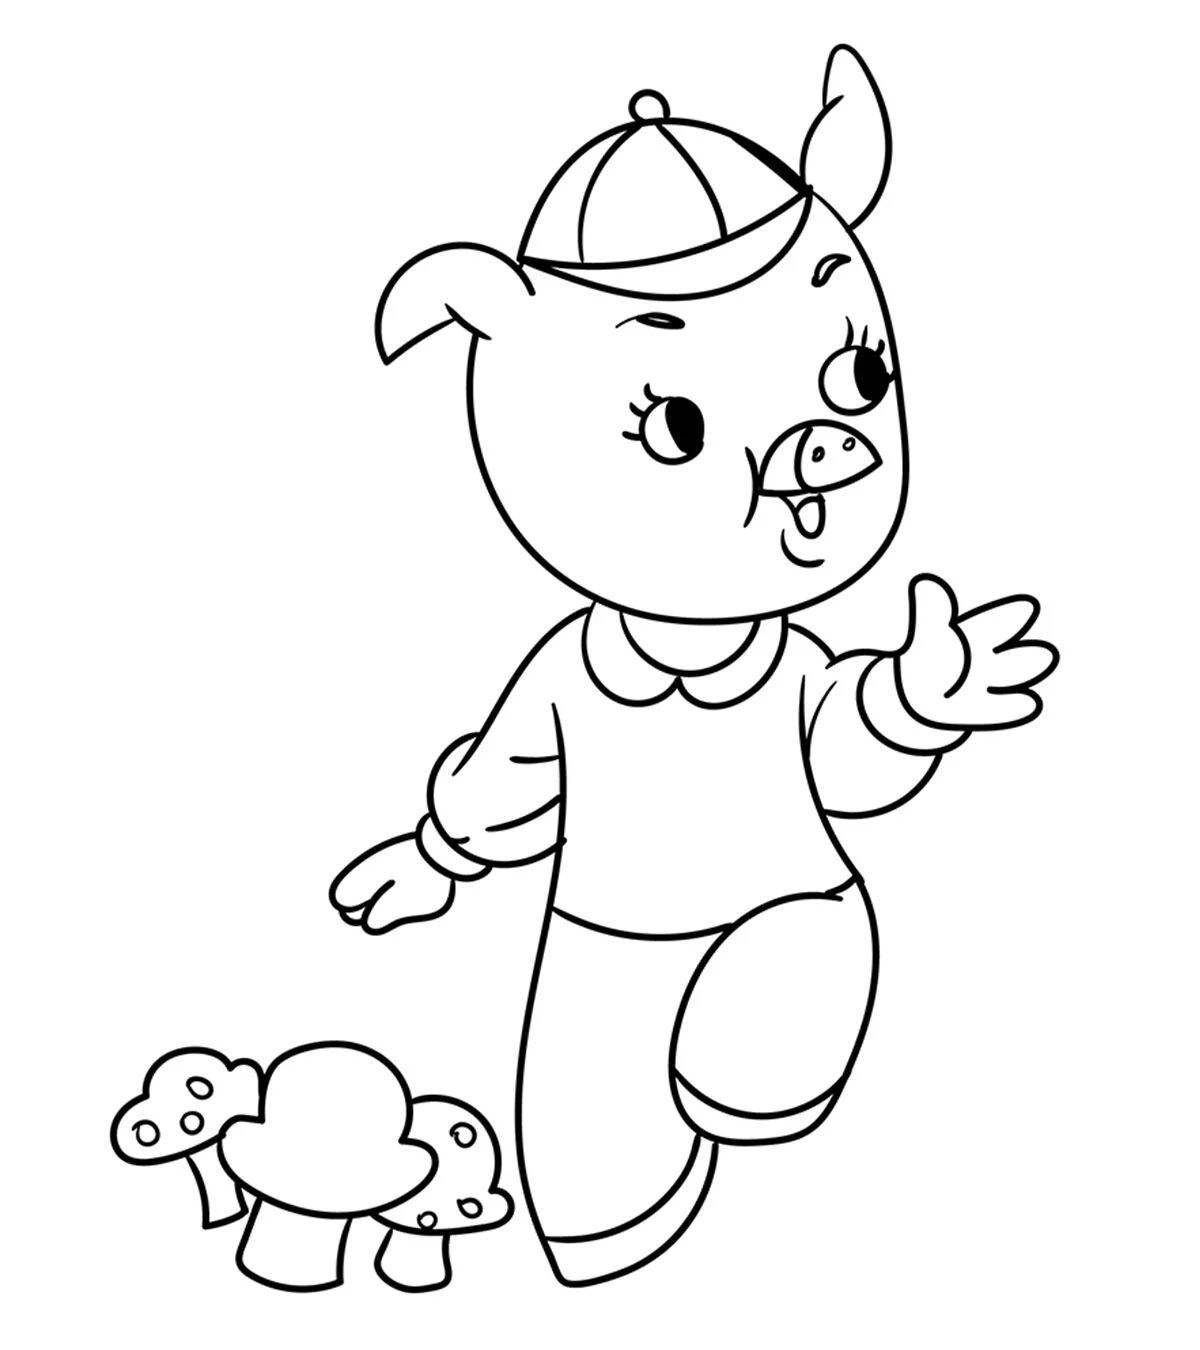 Coloring pages 3 little pigs with crazy colors